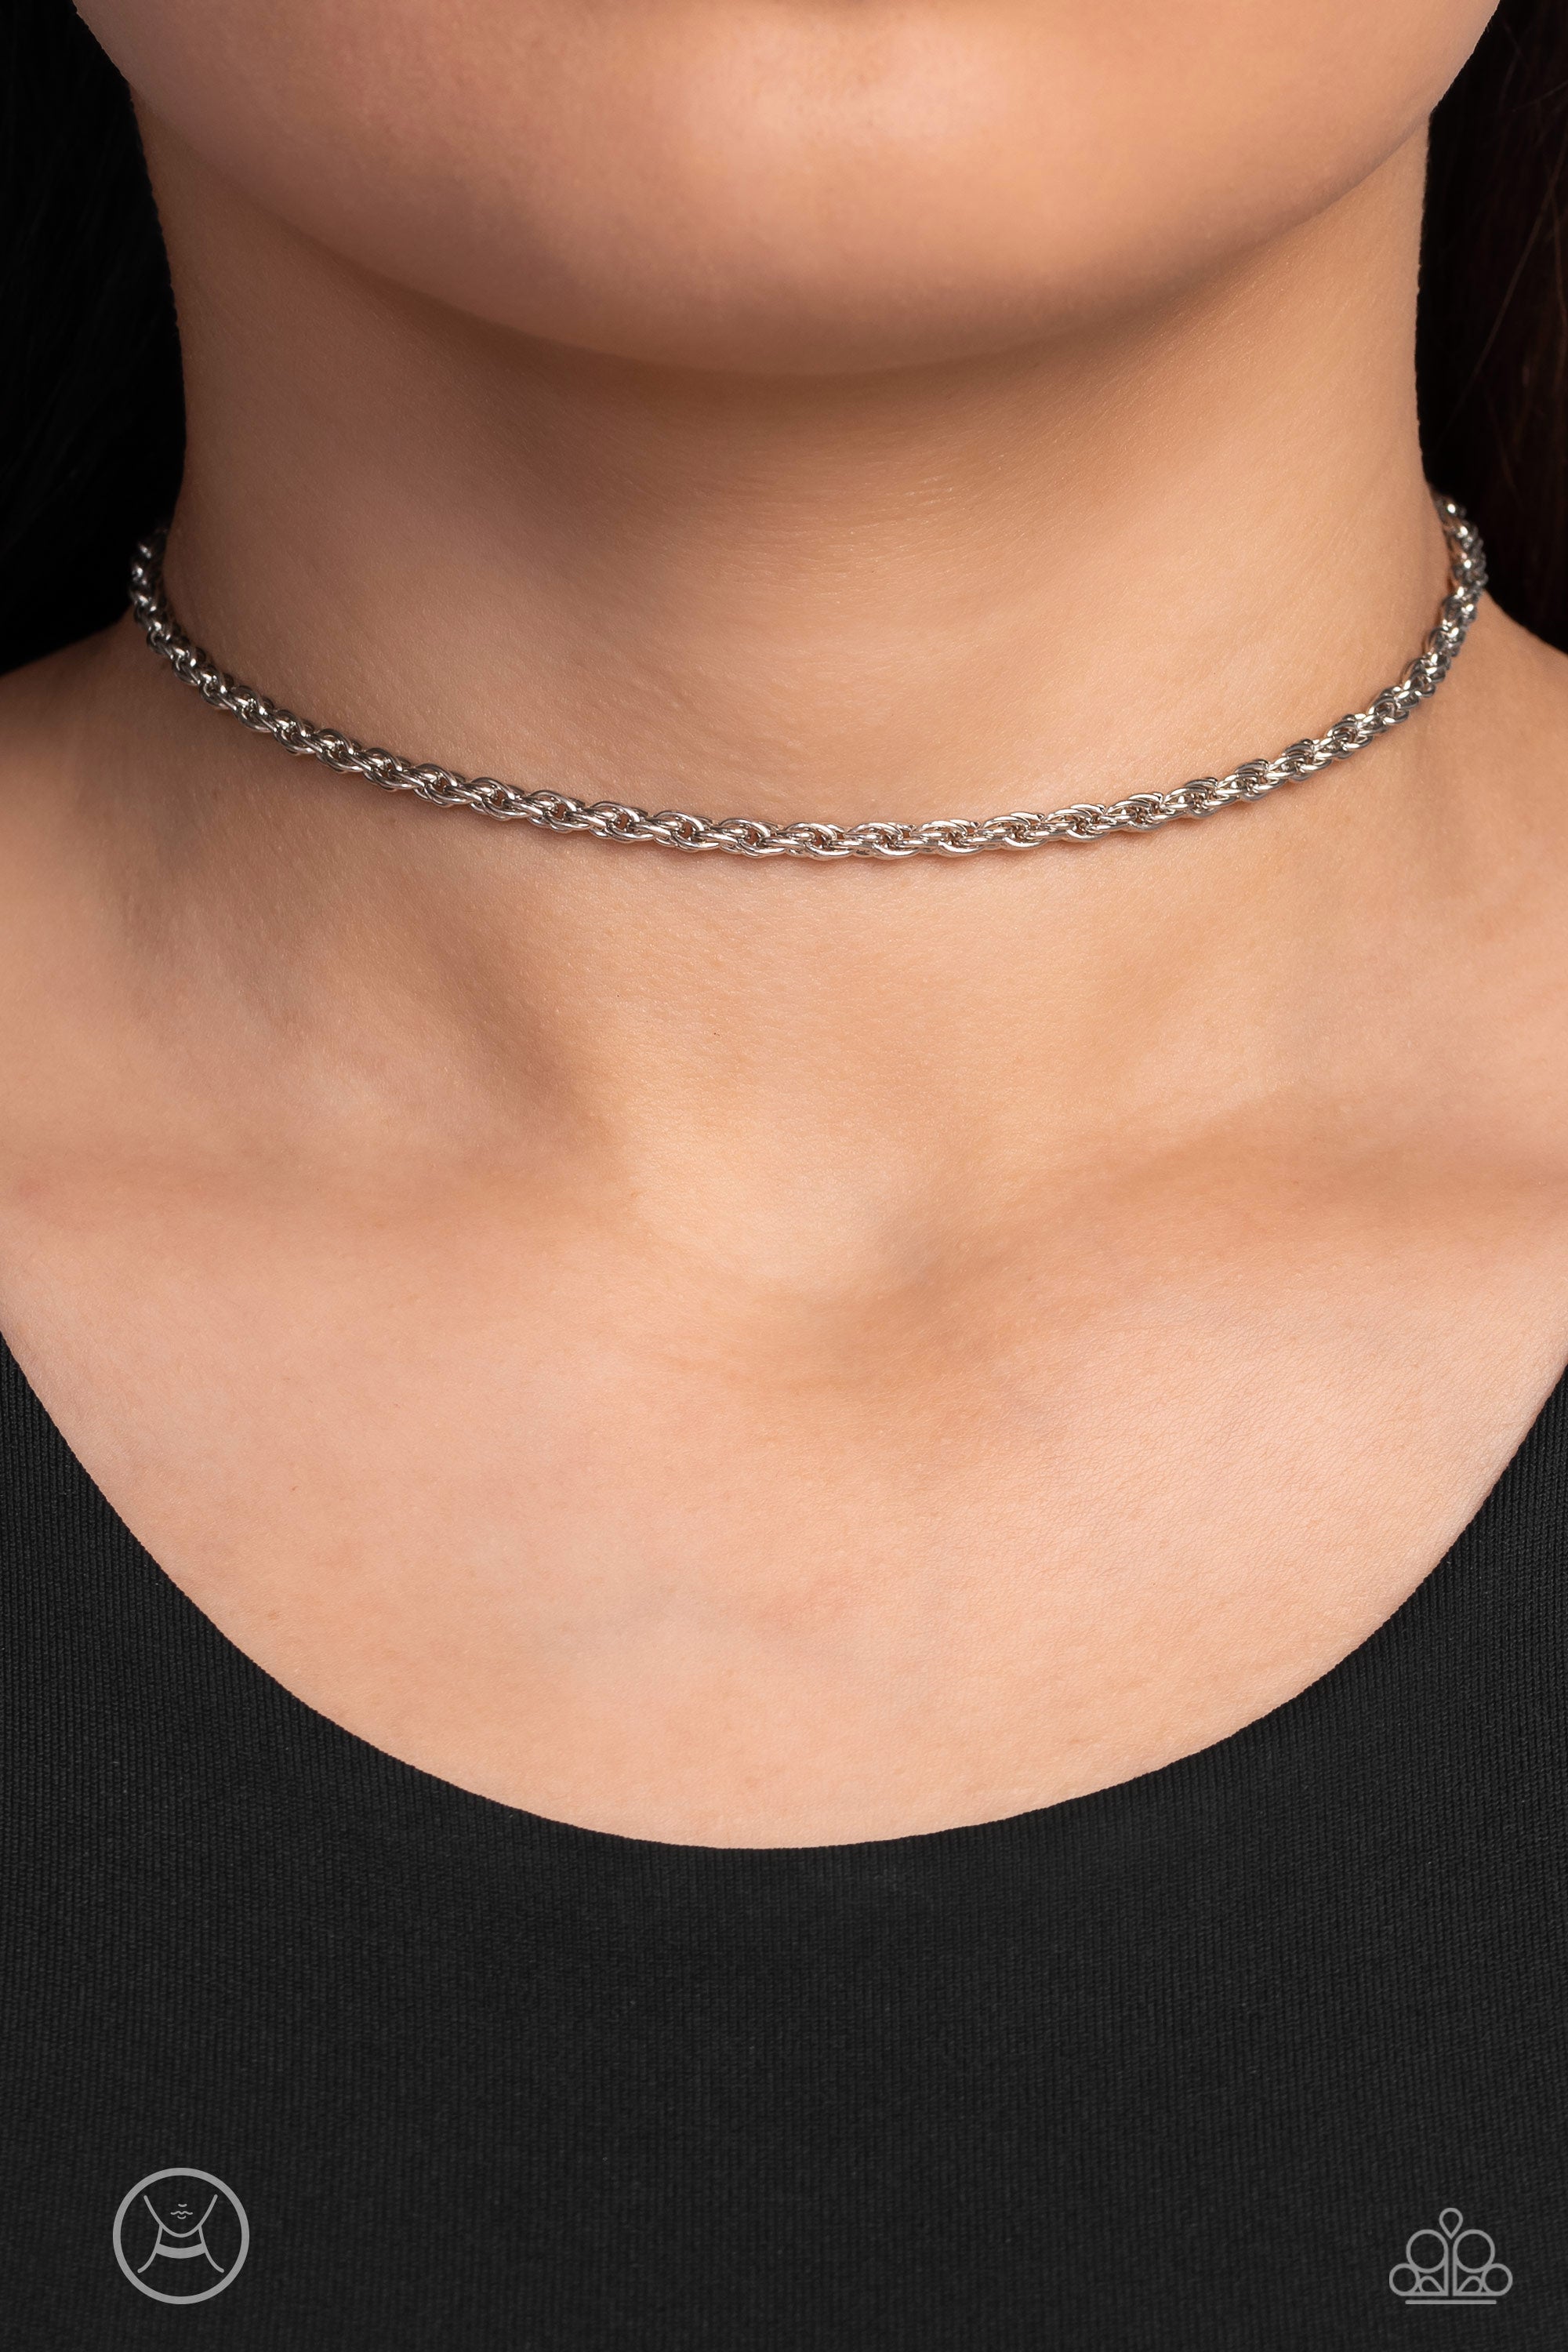 Glimmer of ROPE Silver Choker Necklace - Paparazzi Accessories- lightbox - CarasShop.com - $5 Jewelry by Cara Jewels